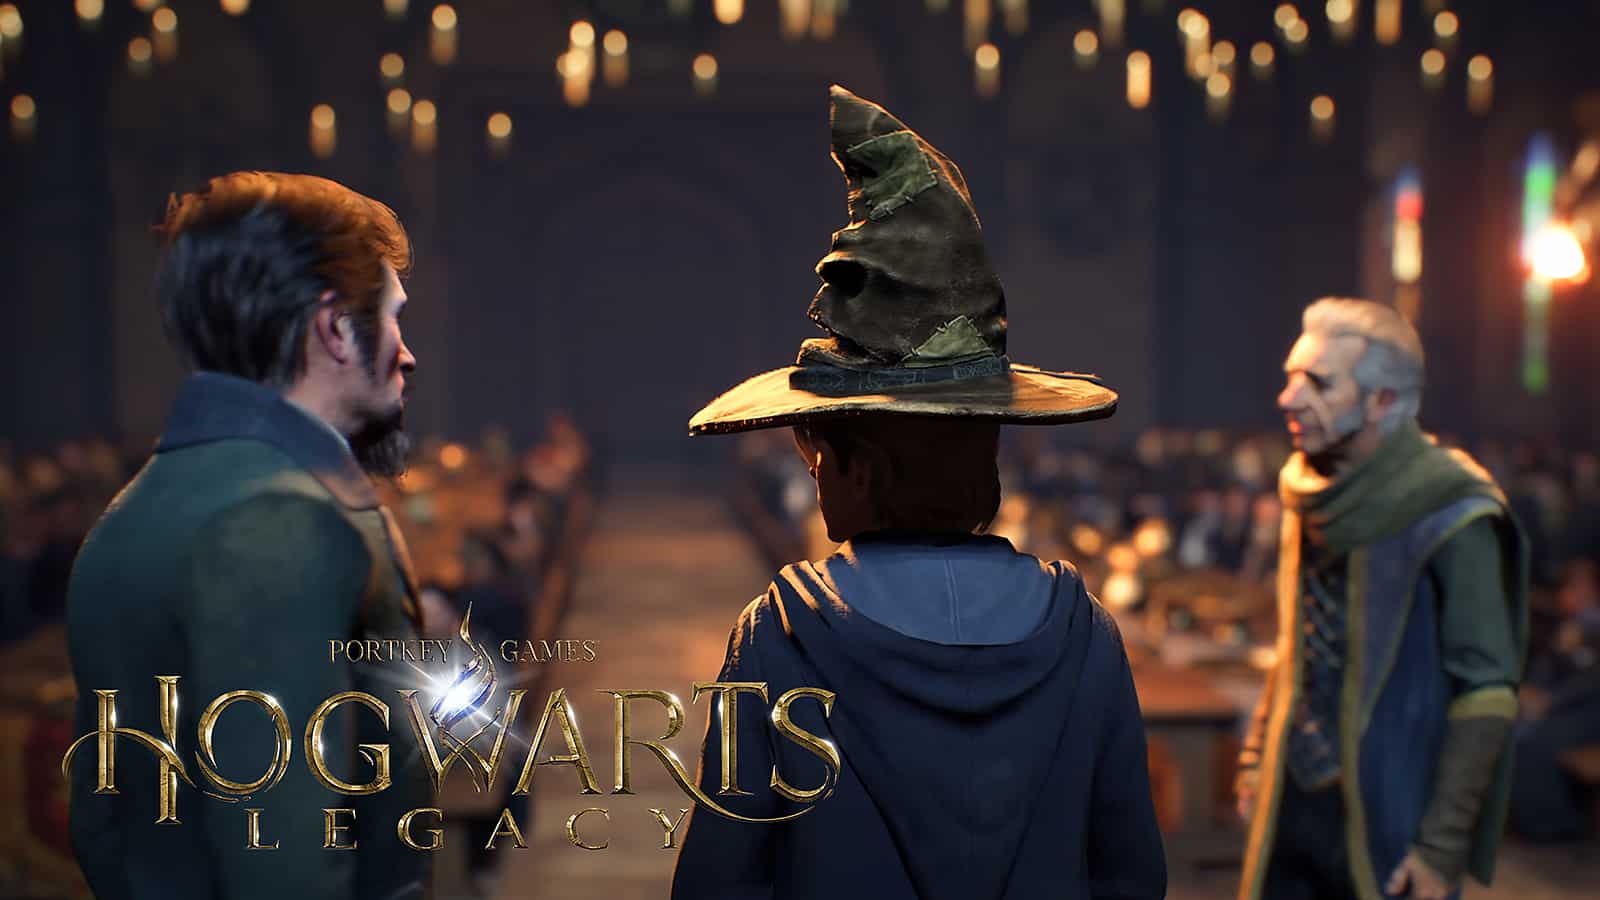 PS4 & Xbox One versions delayed to May 5, 2023. : r/HarryPotterGame